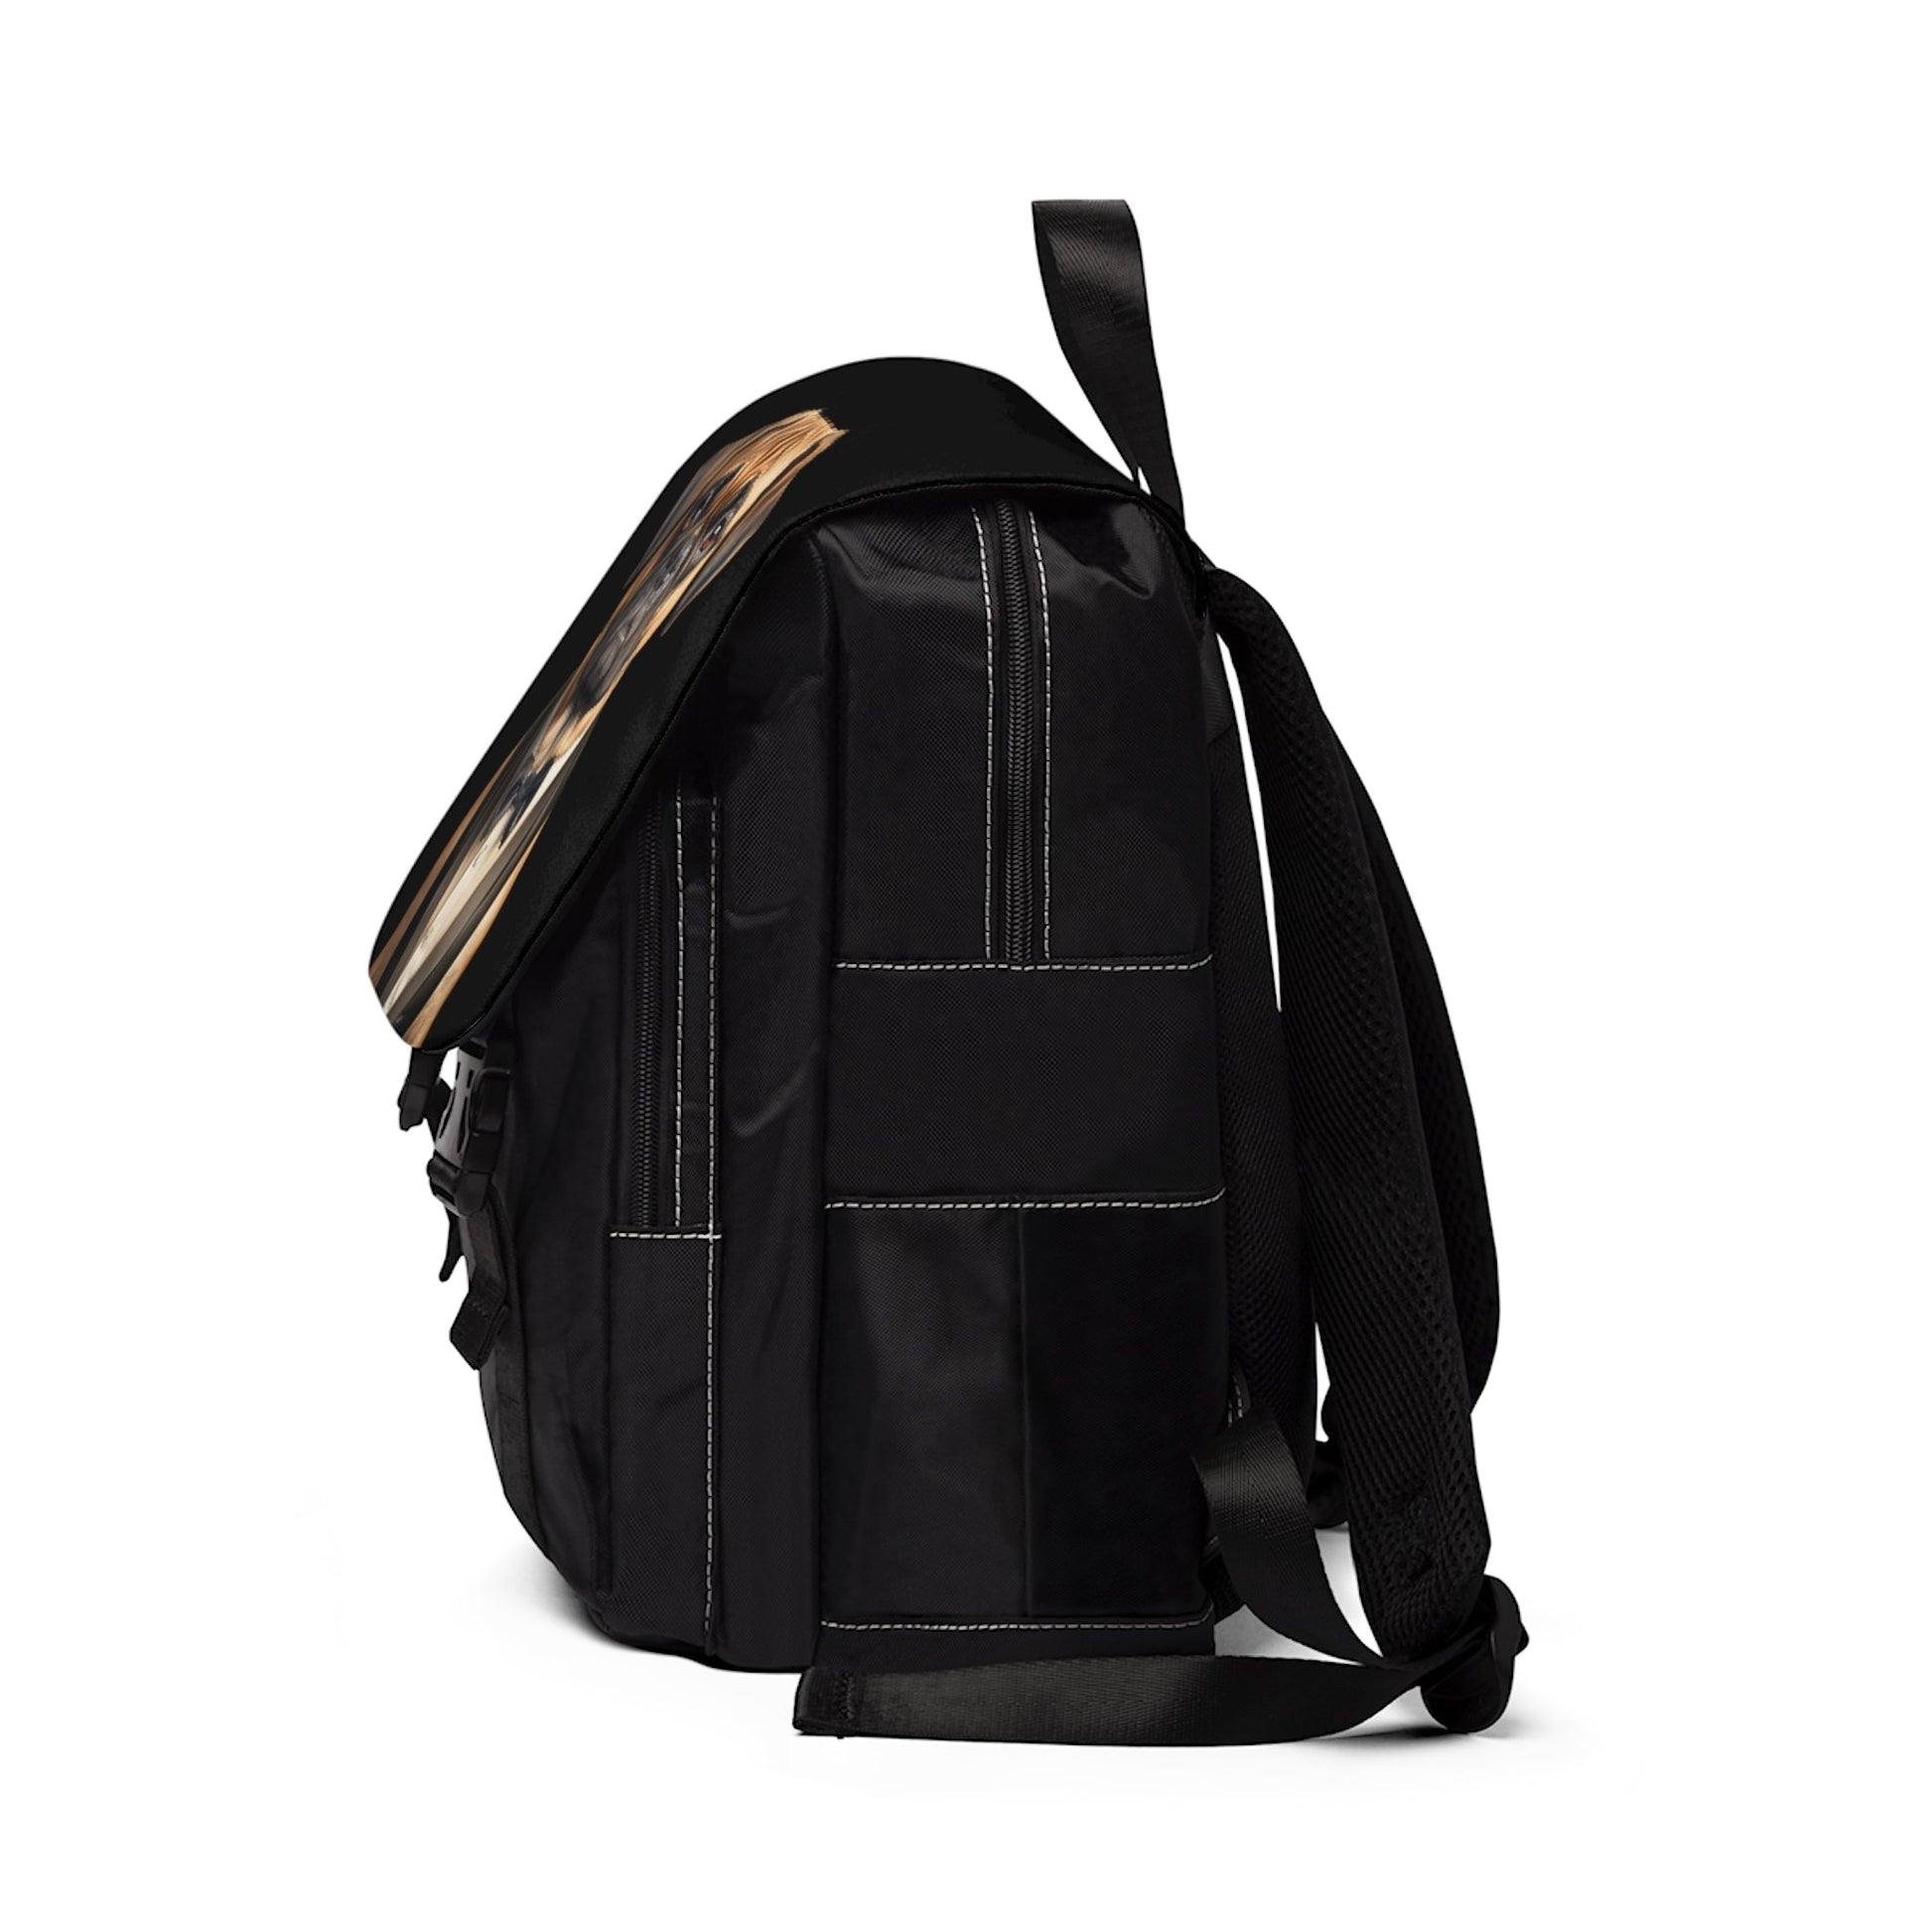 PETER : Unisex Casual Shoulder Backpack - Shaggy Chic